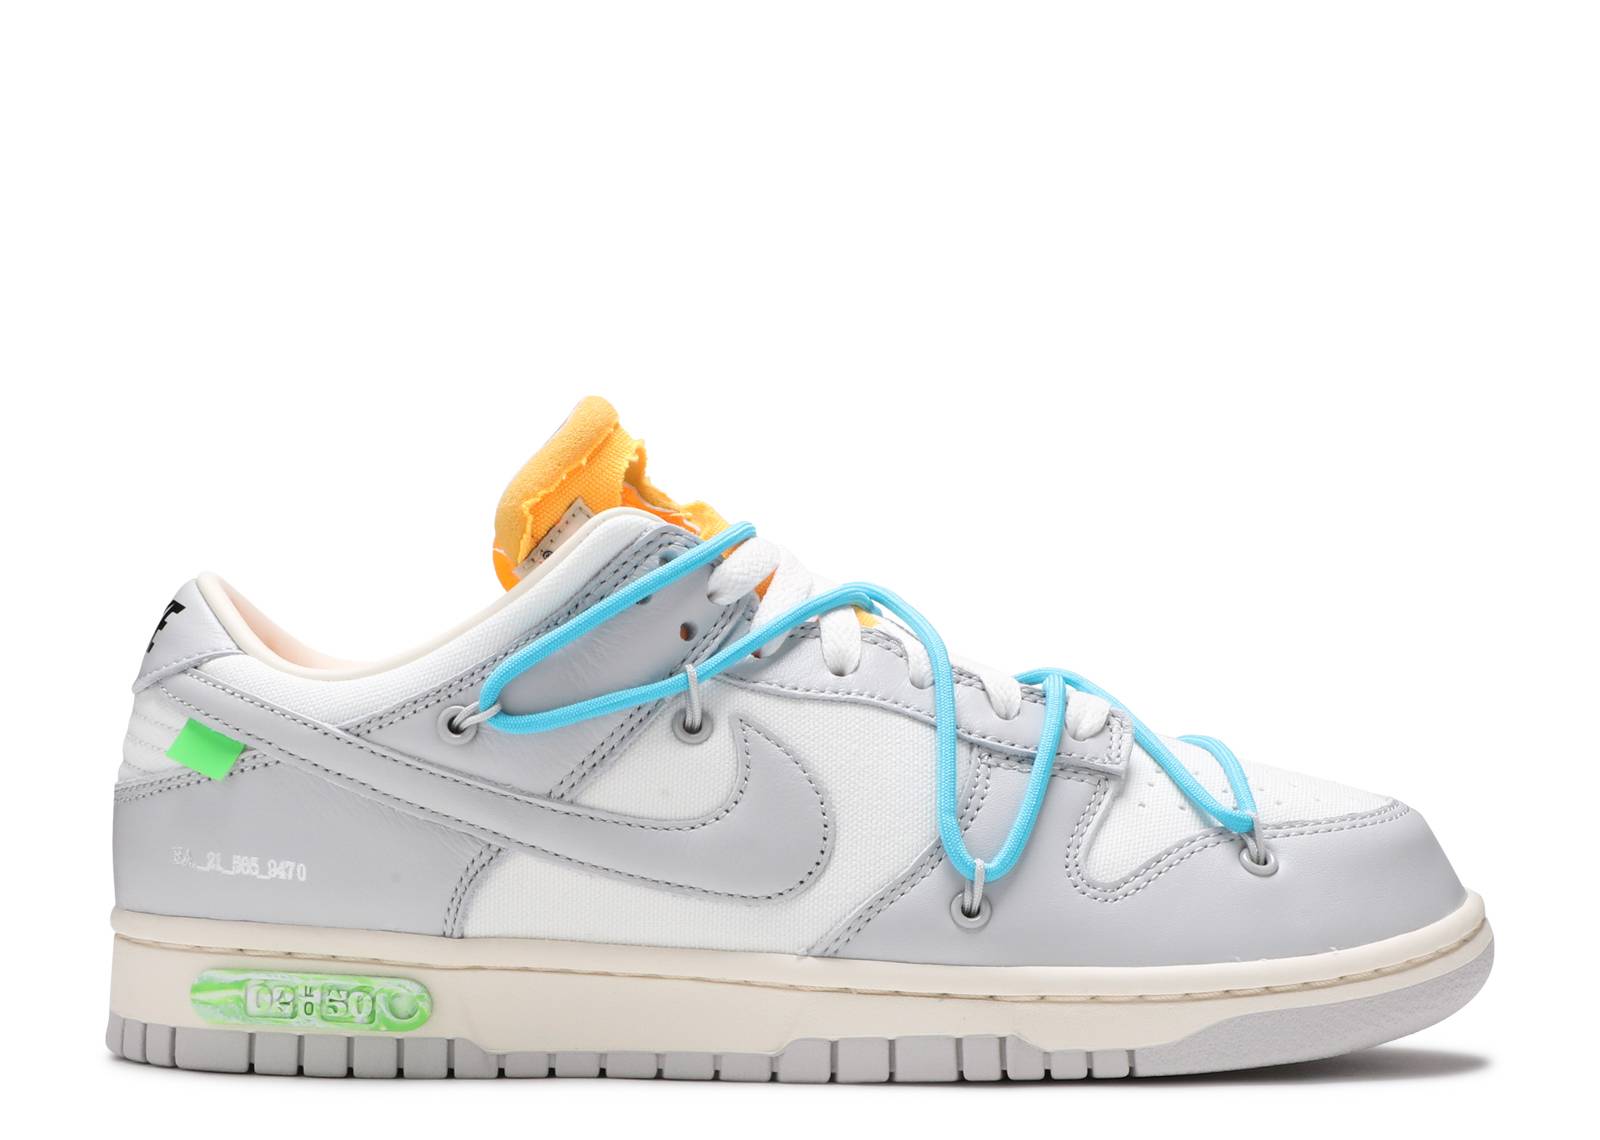 Off-White x Dunk Low Lot 02 of 50